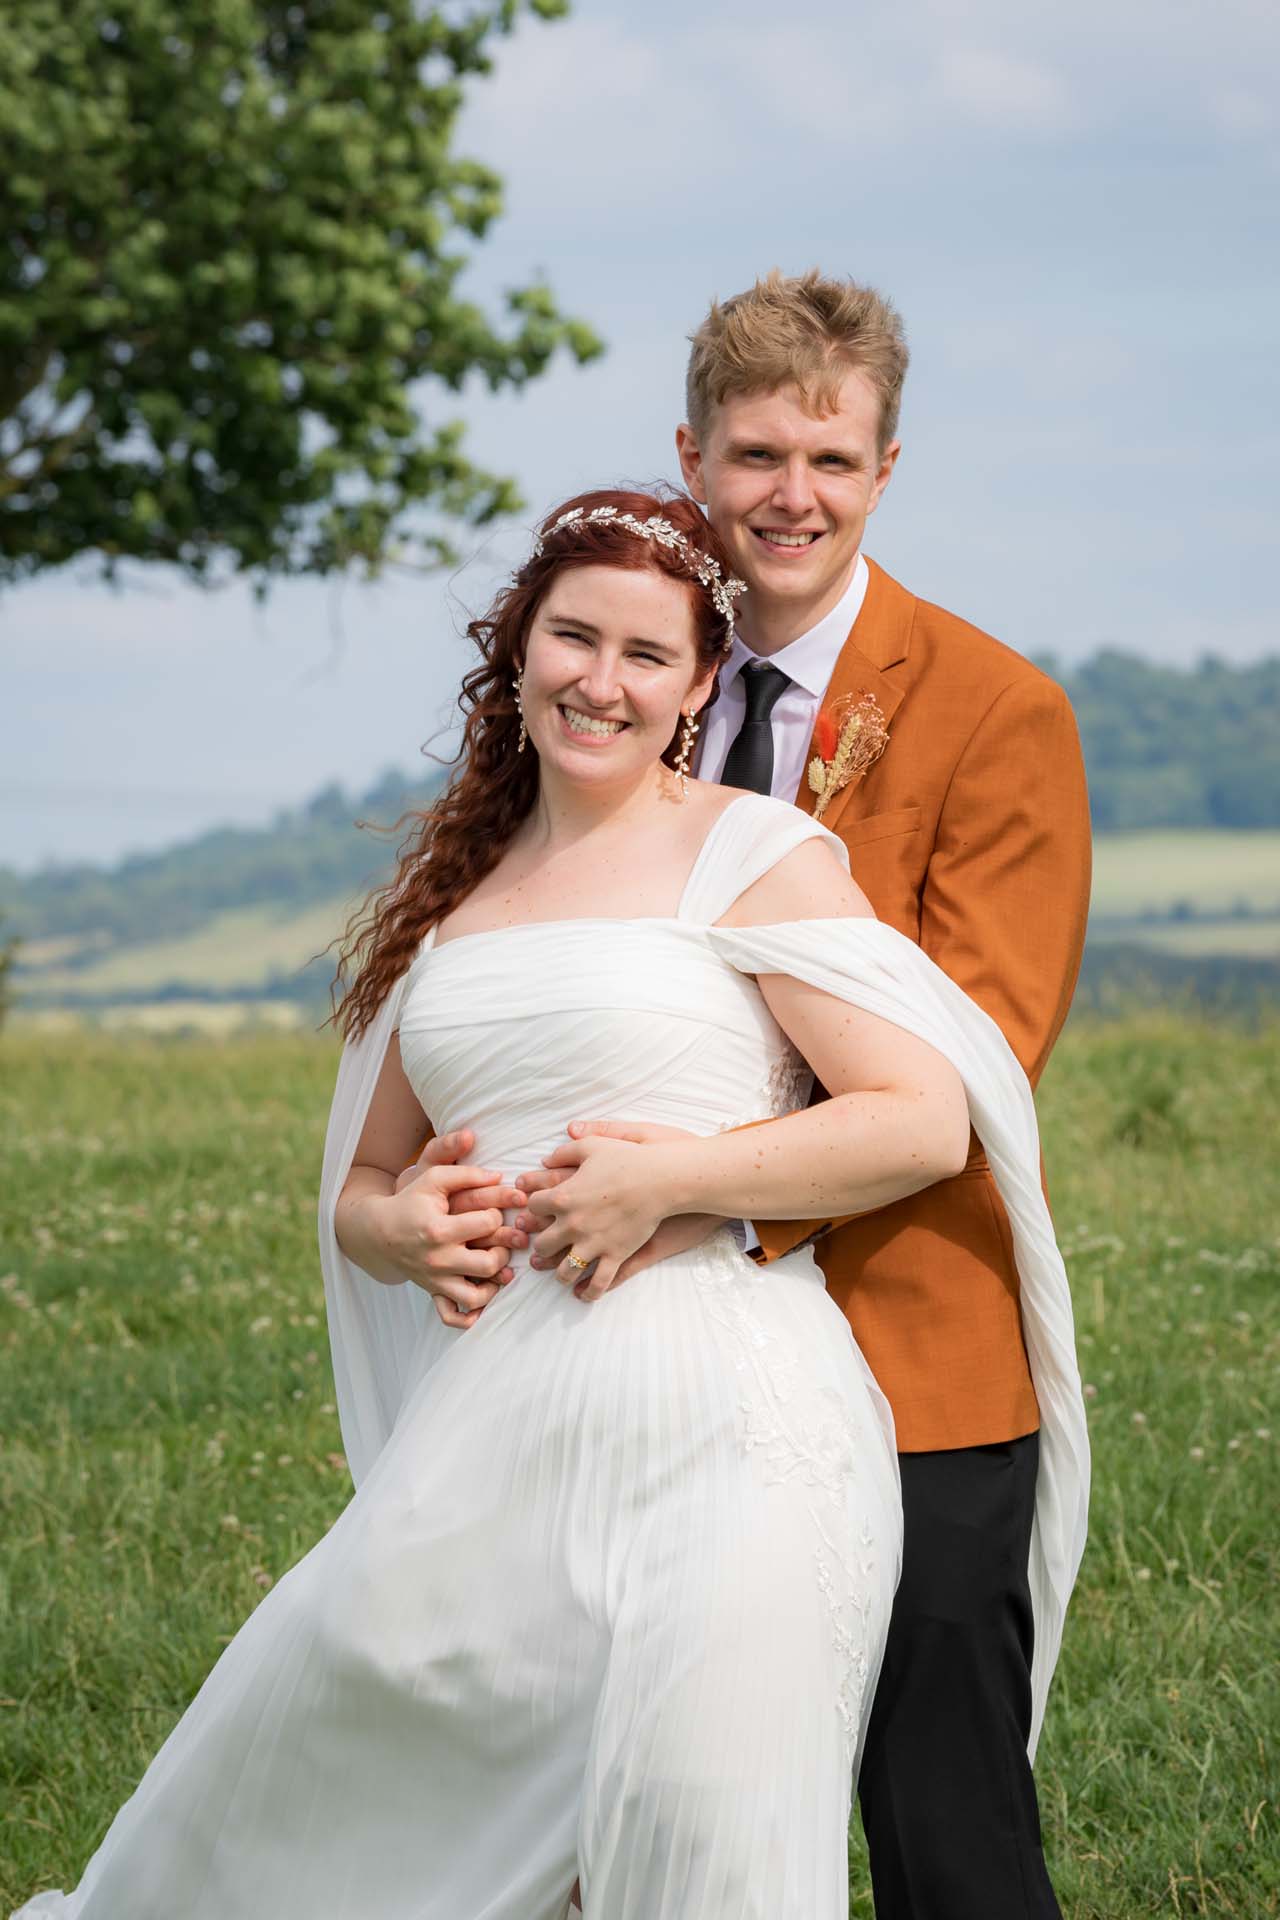 couples portraits in the field coventry wedding bromley wedding photographer kent south london